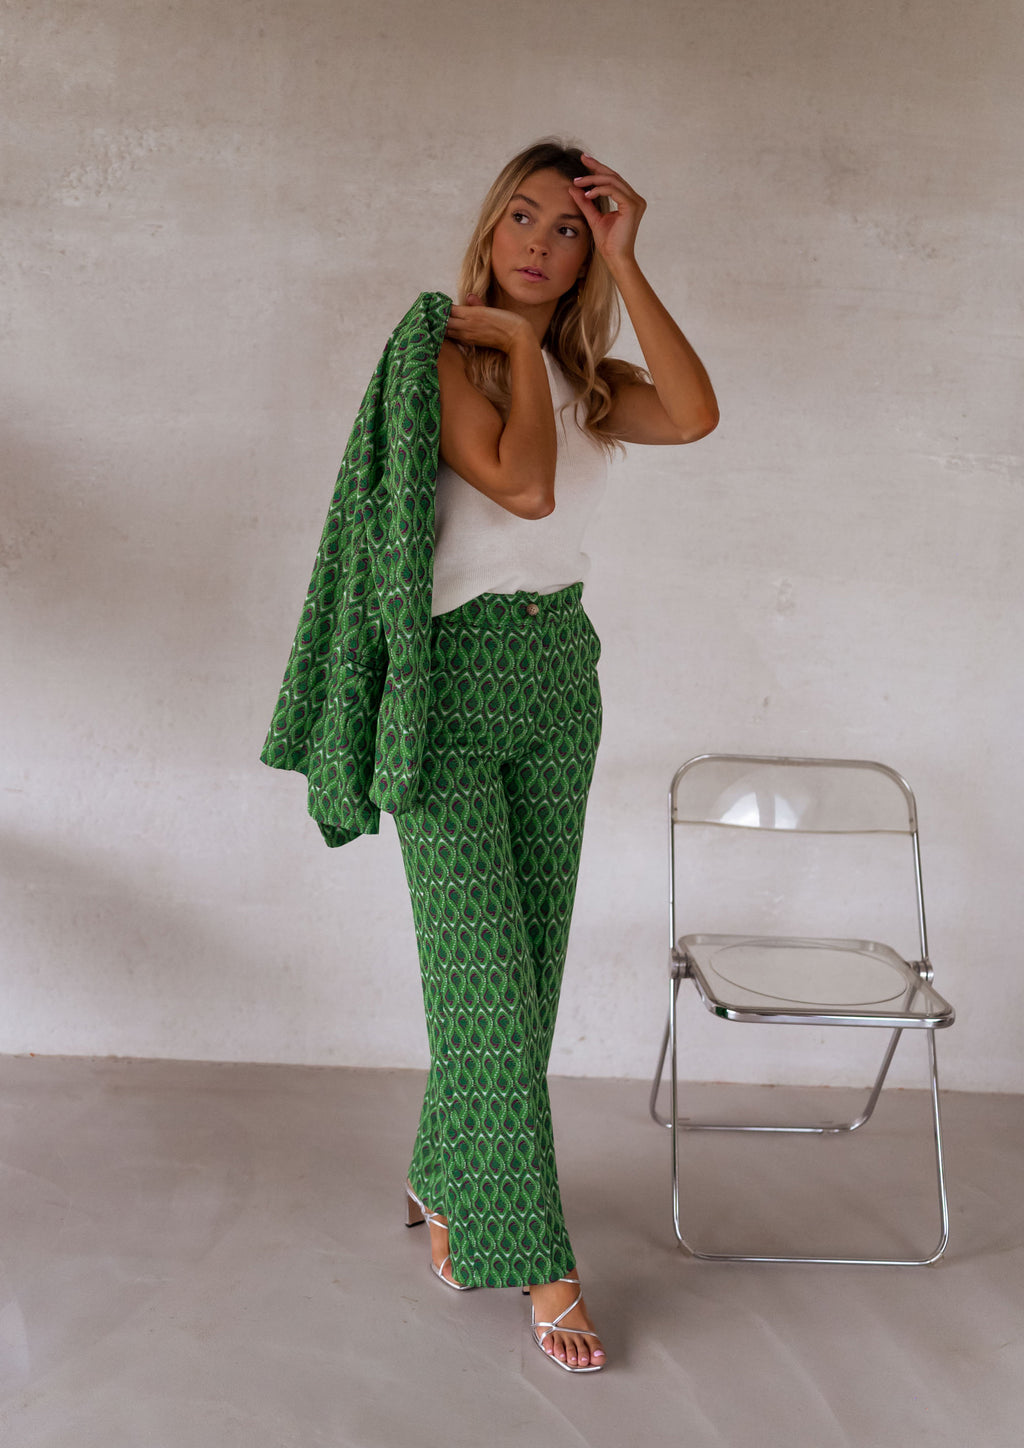 Pants Peter - green patterned